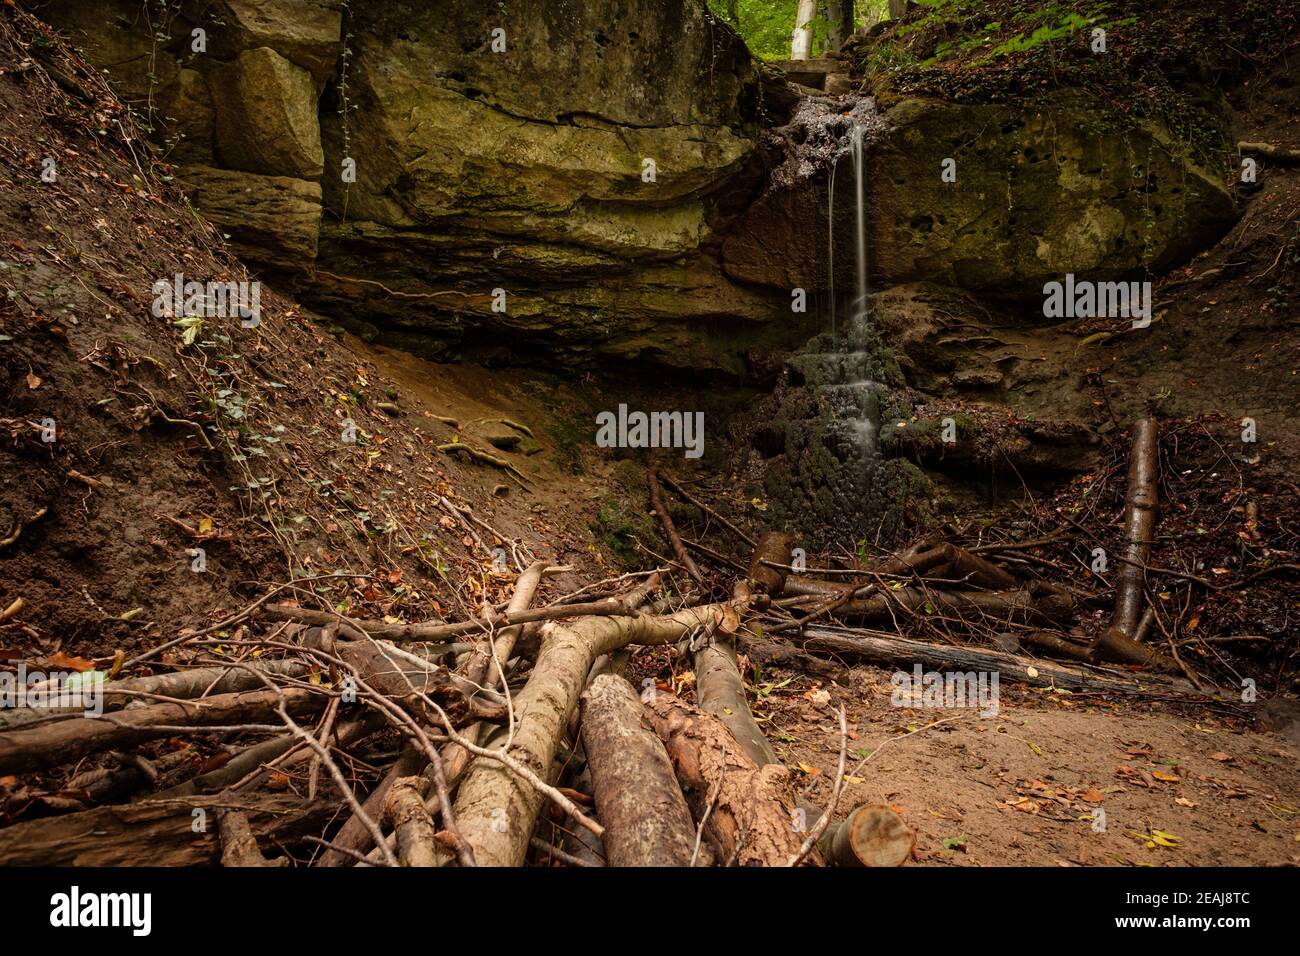 Waterfall is falling over a sandstone rock in a forest Stock Photo